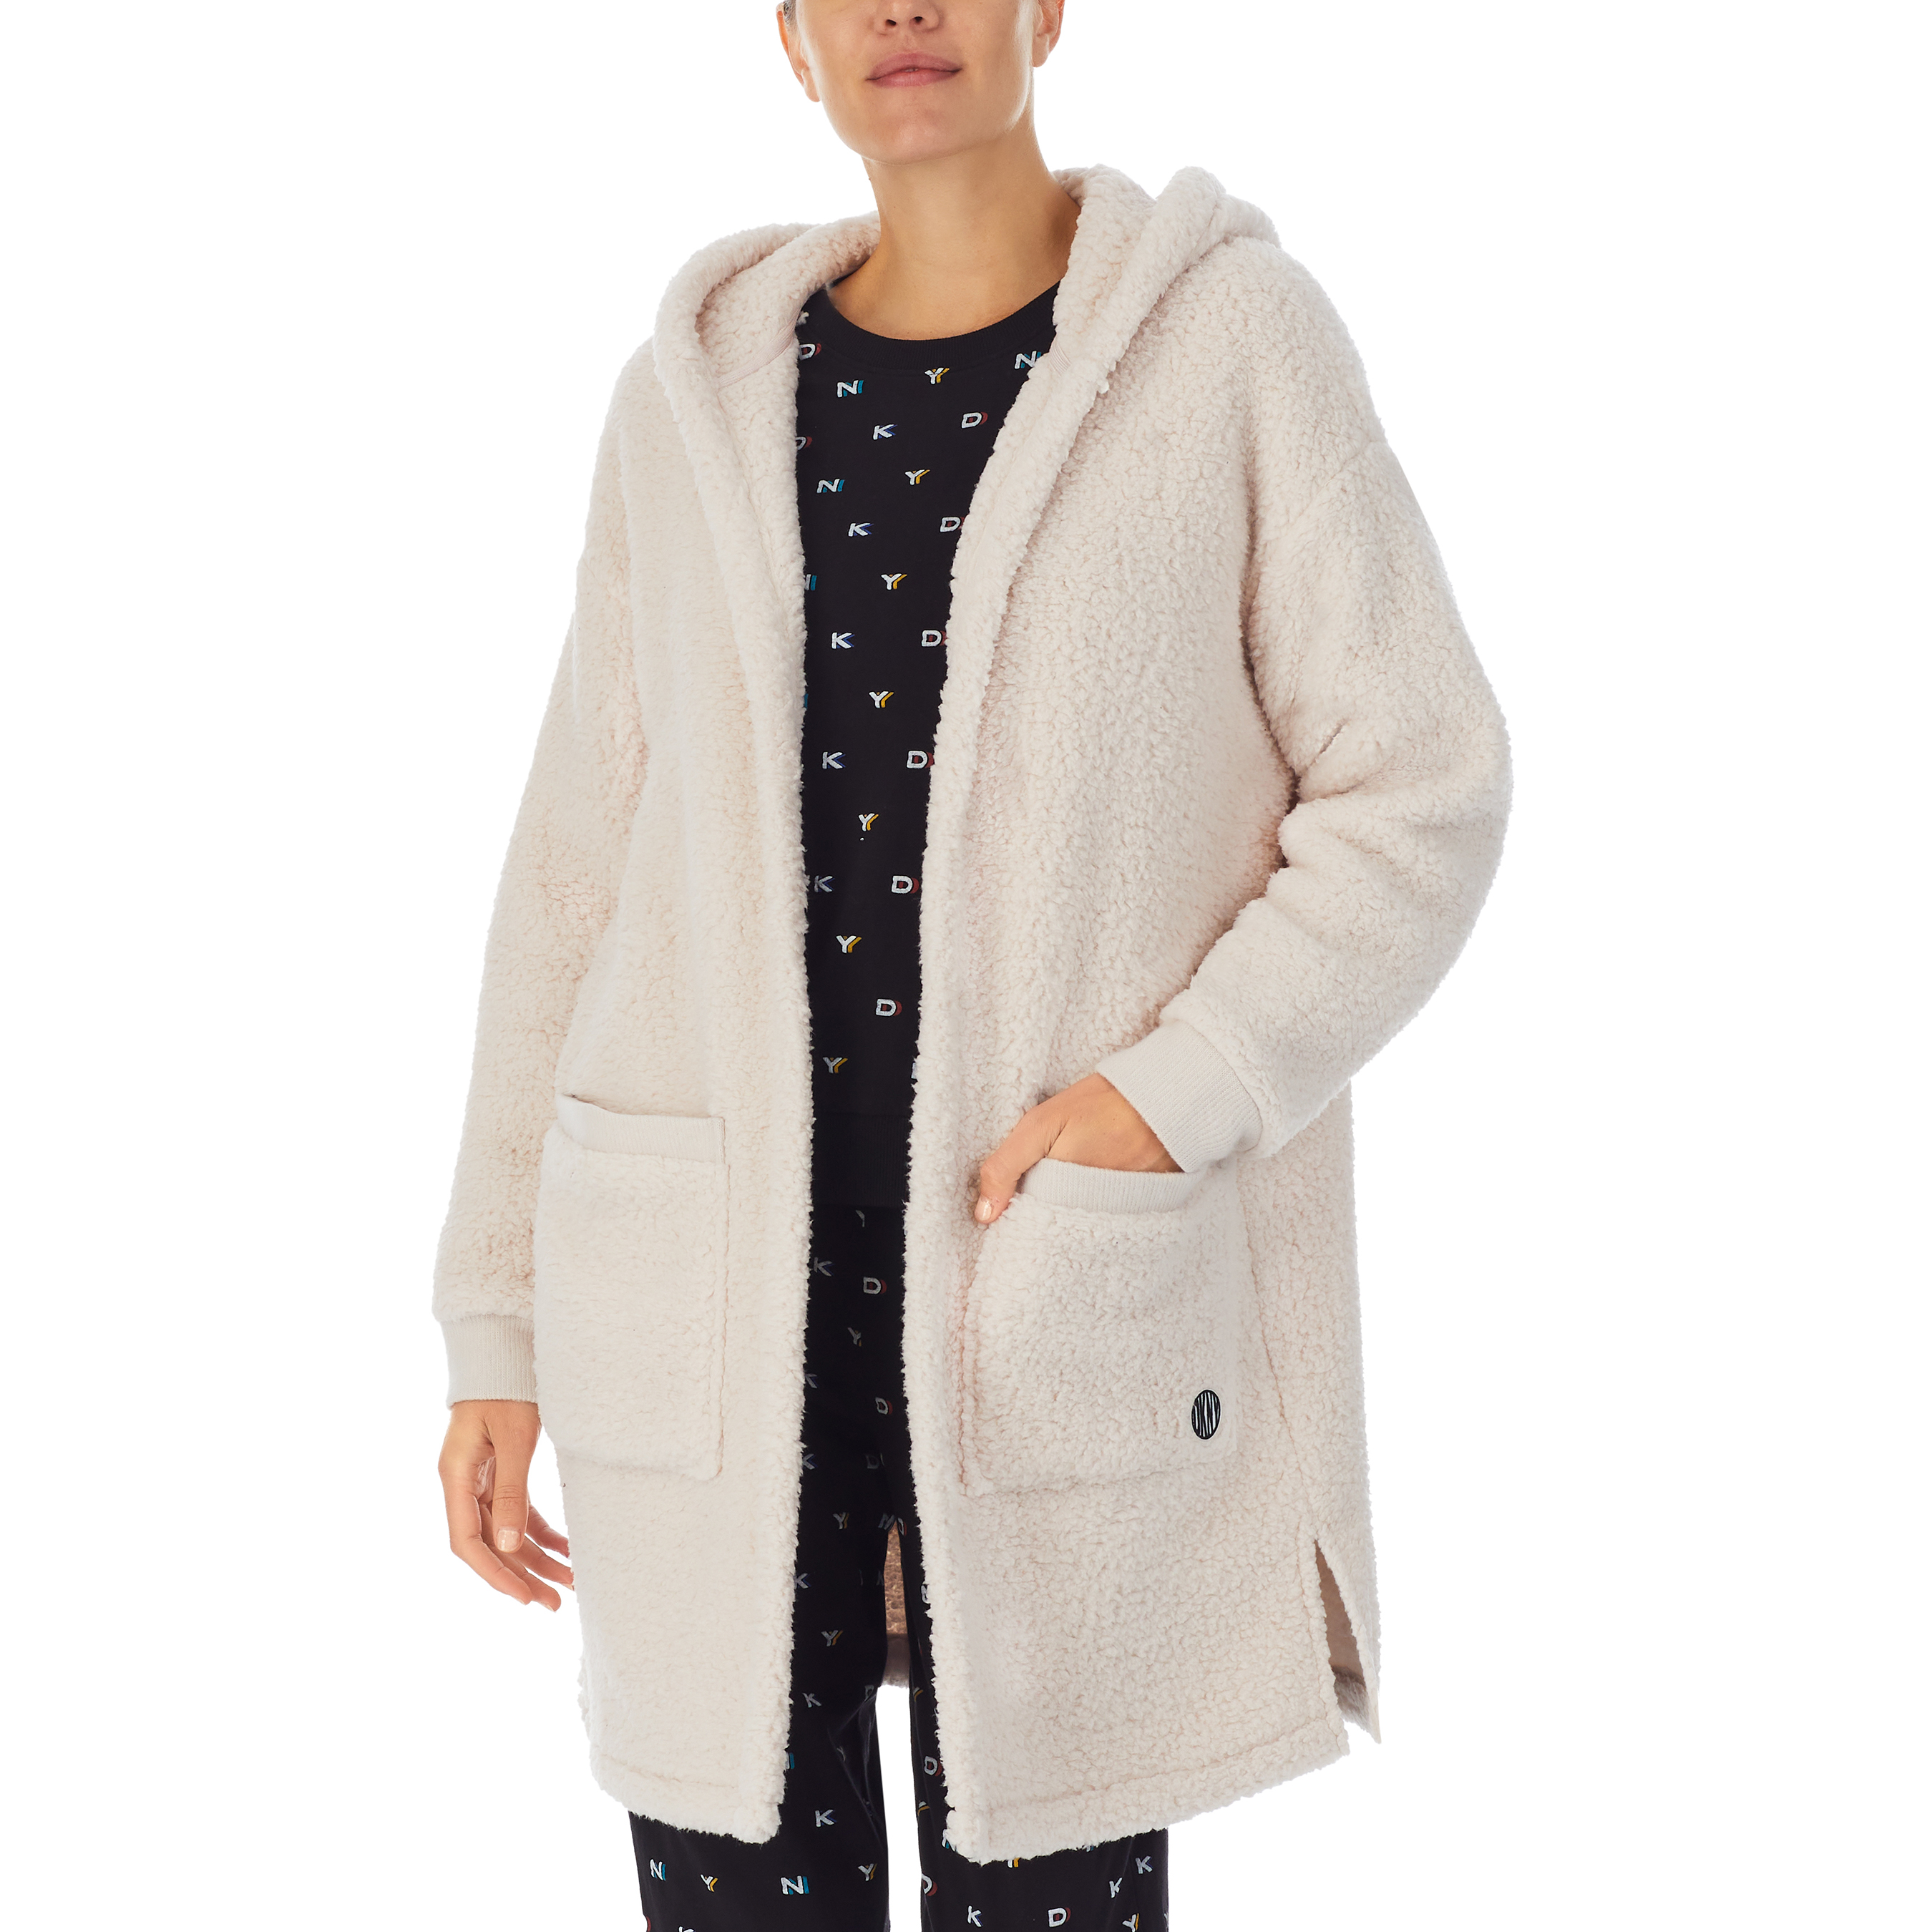 Keep it Real Cosy - Hooded Lounge Layer, DKNY-2022599-Tusk